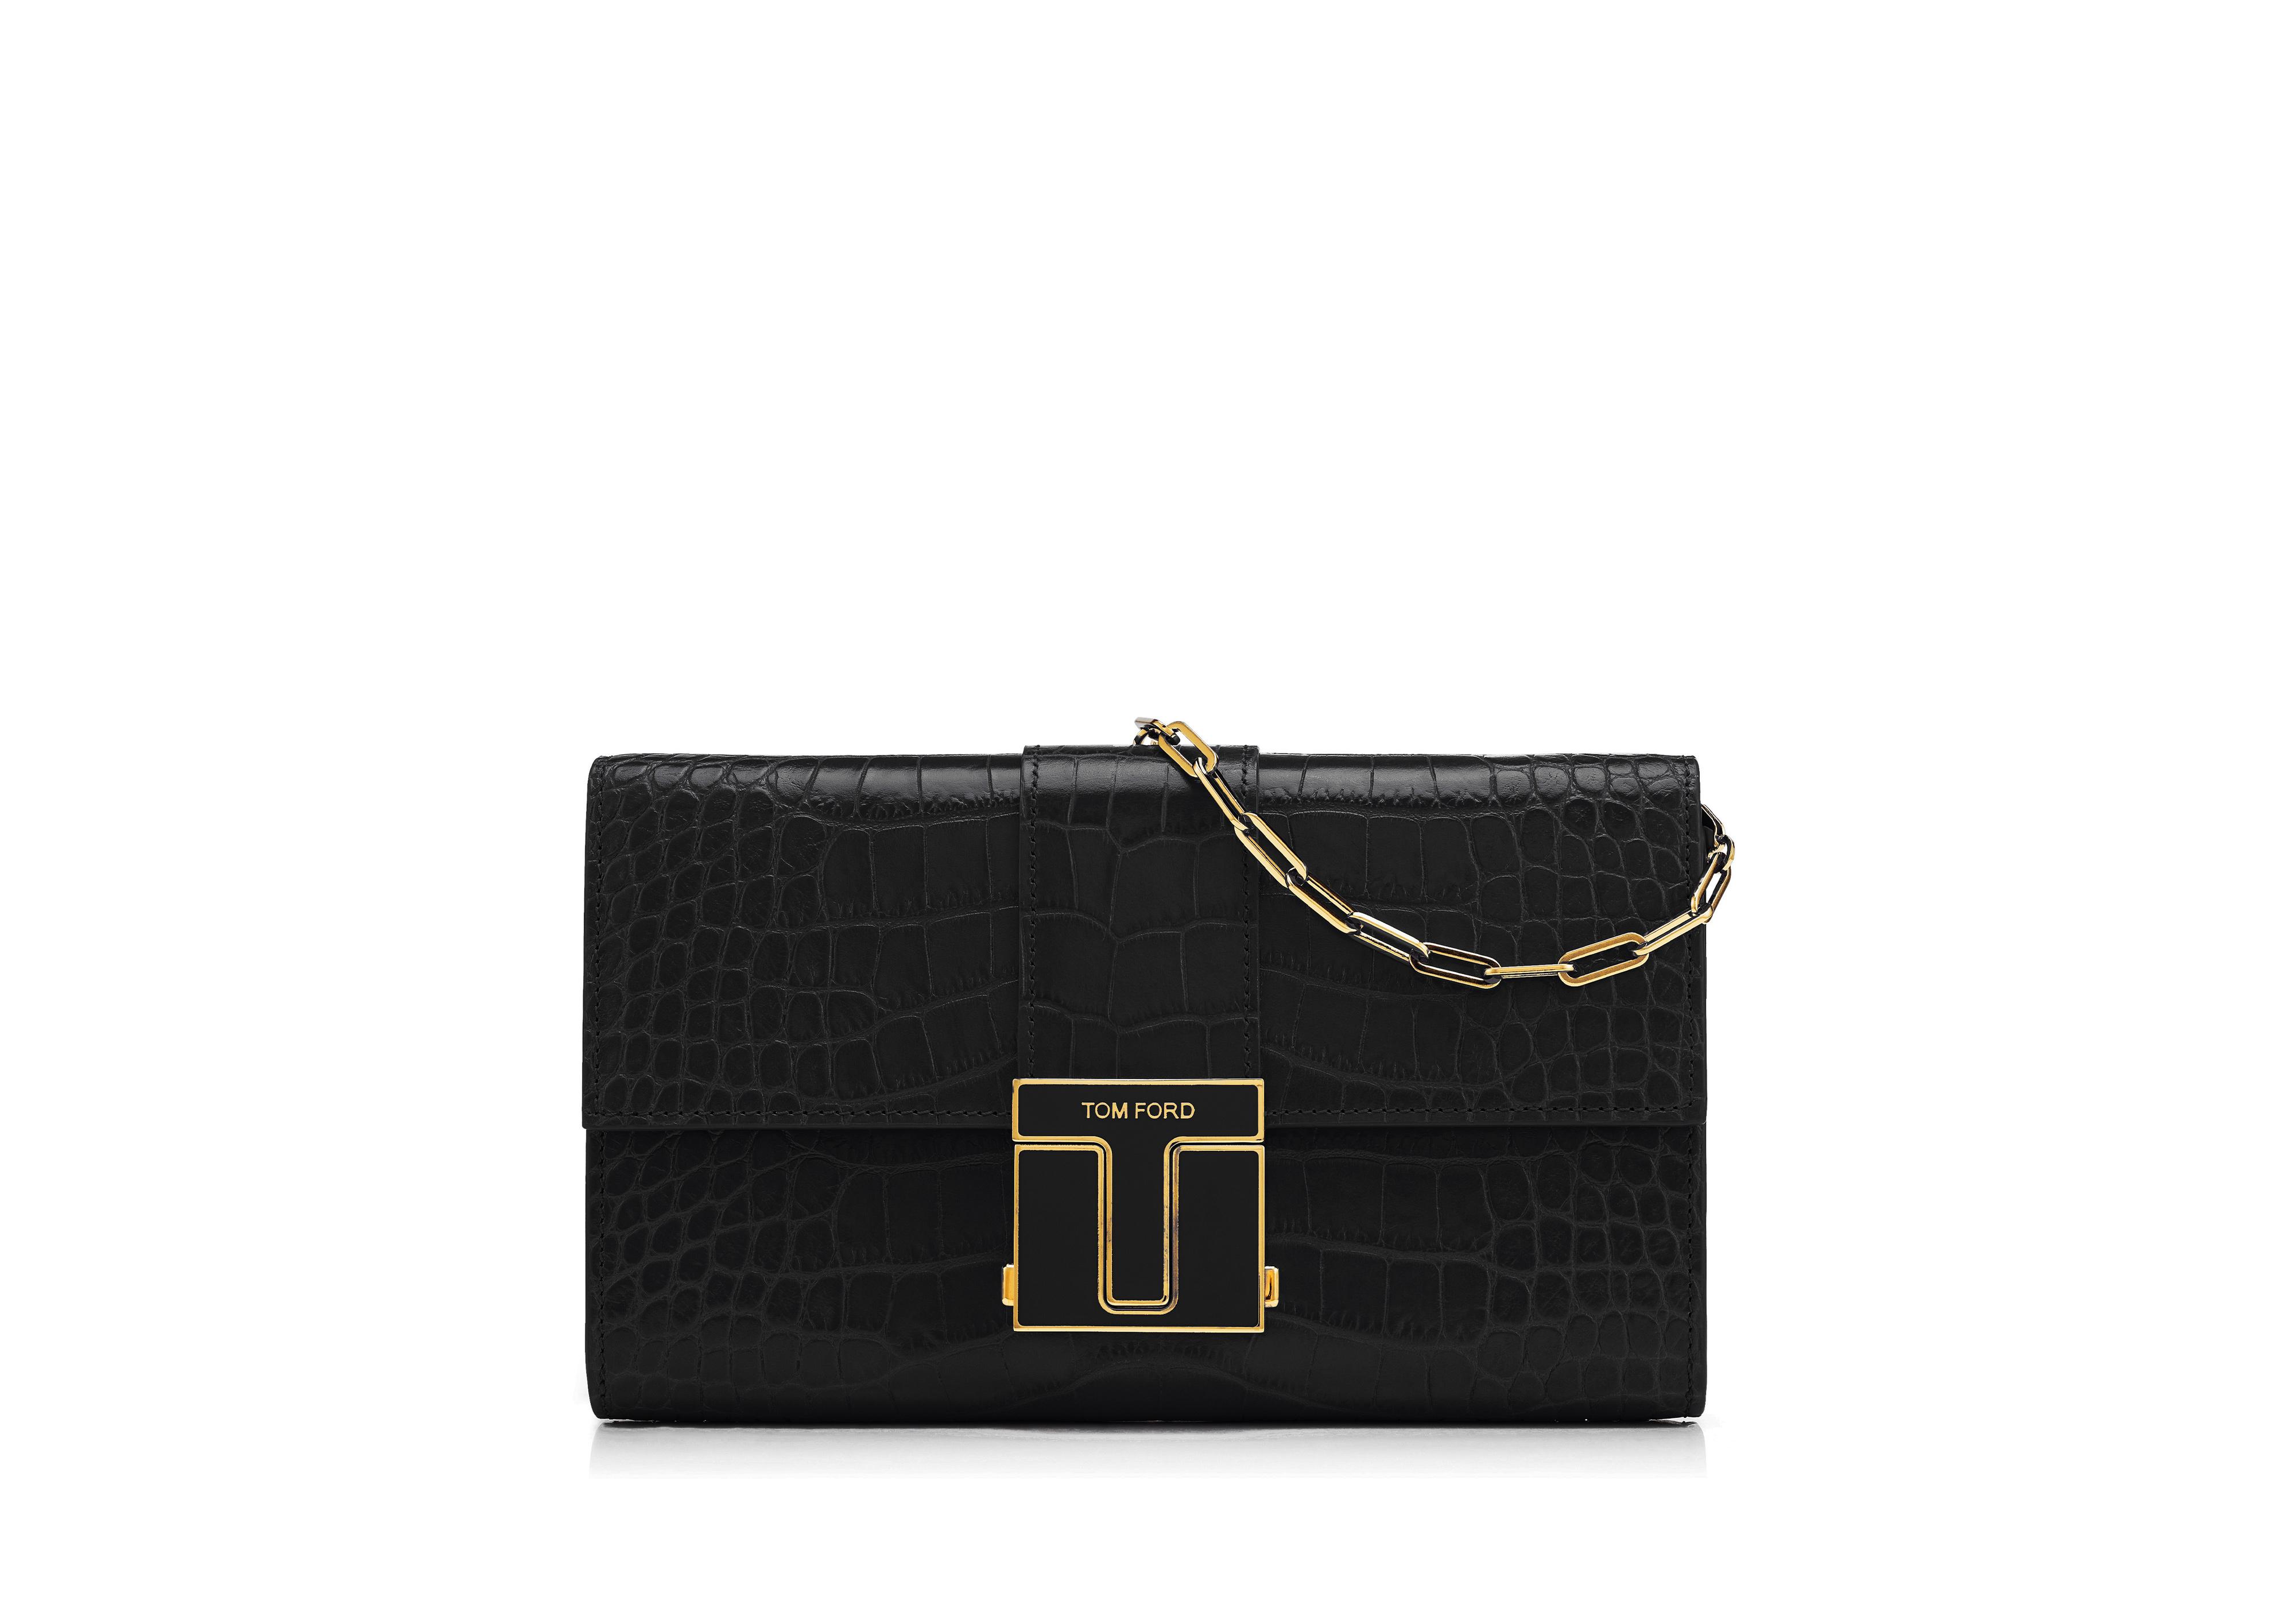 Tom Ford SHINY STAMPED CROCODILE LEATHER 001 CHAIN WALLET 